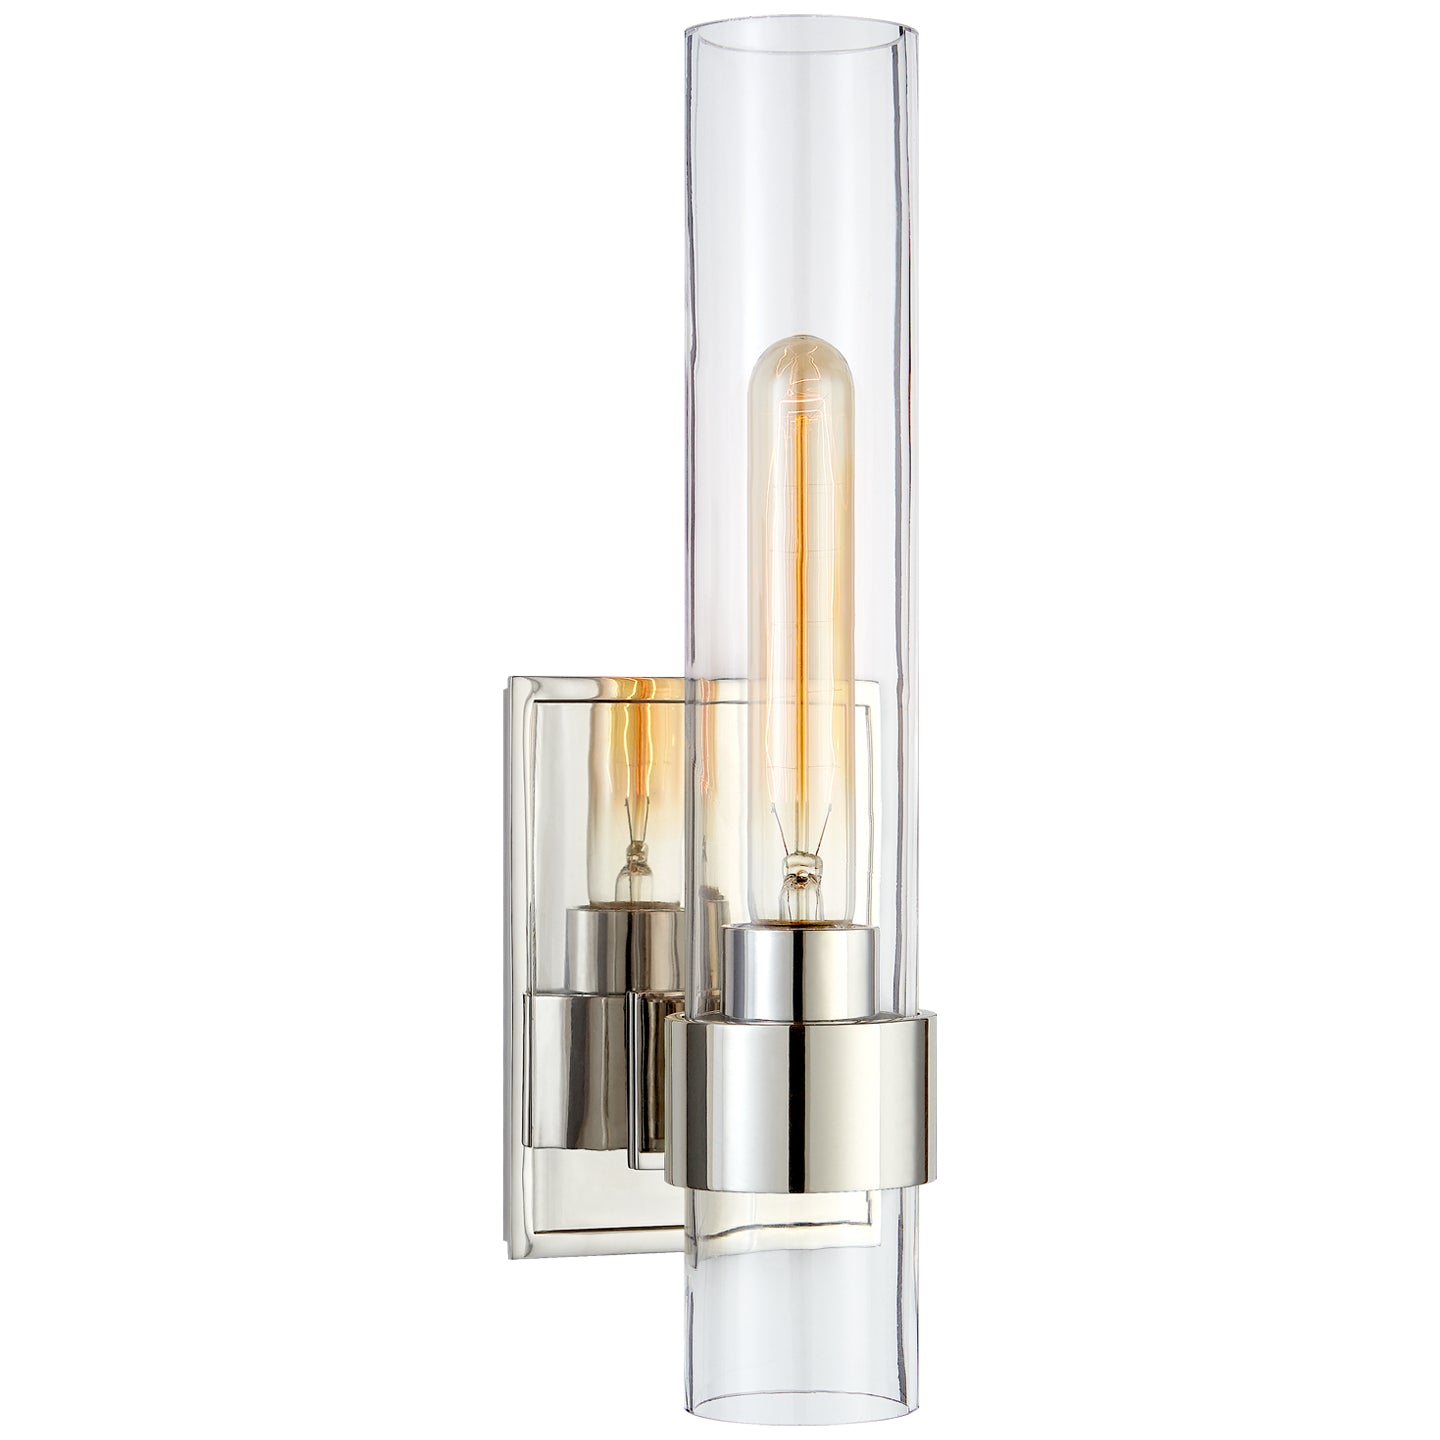 Load image into Gallery viewer, Visual Comfort Signature - S 2165PN-CG - One Light Wall Sconce - Presidio - Polished Nickel
